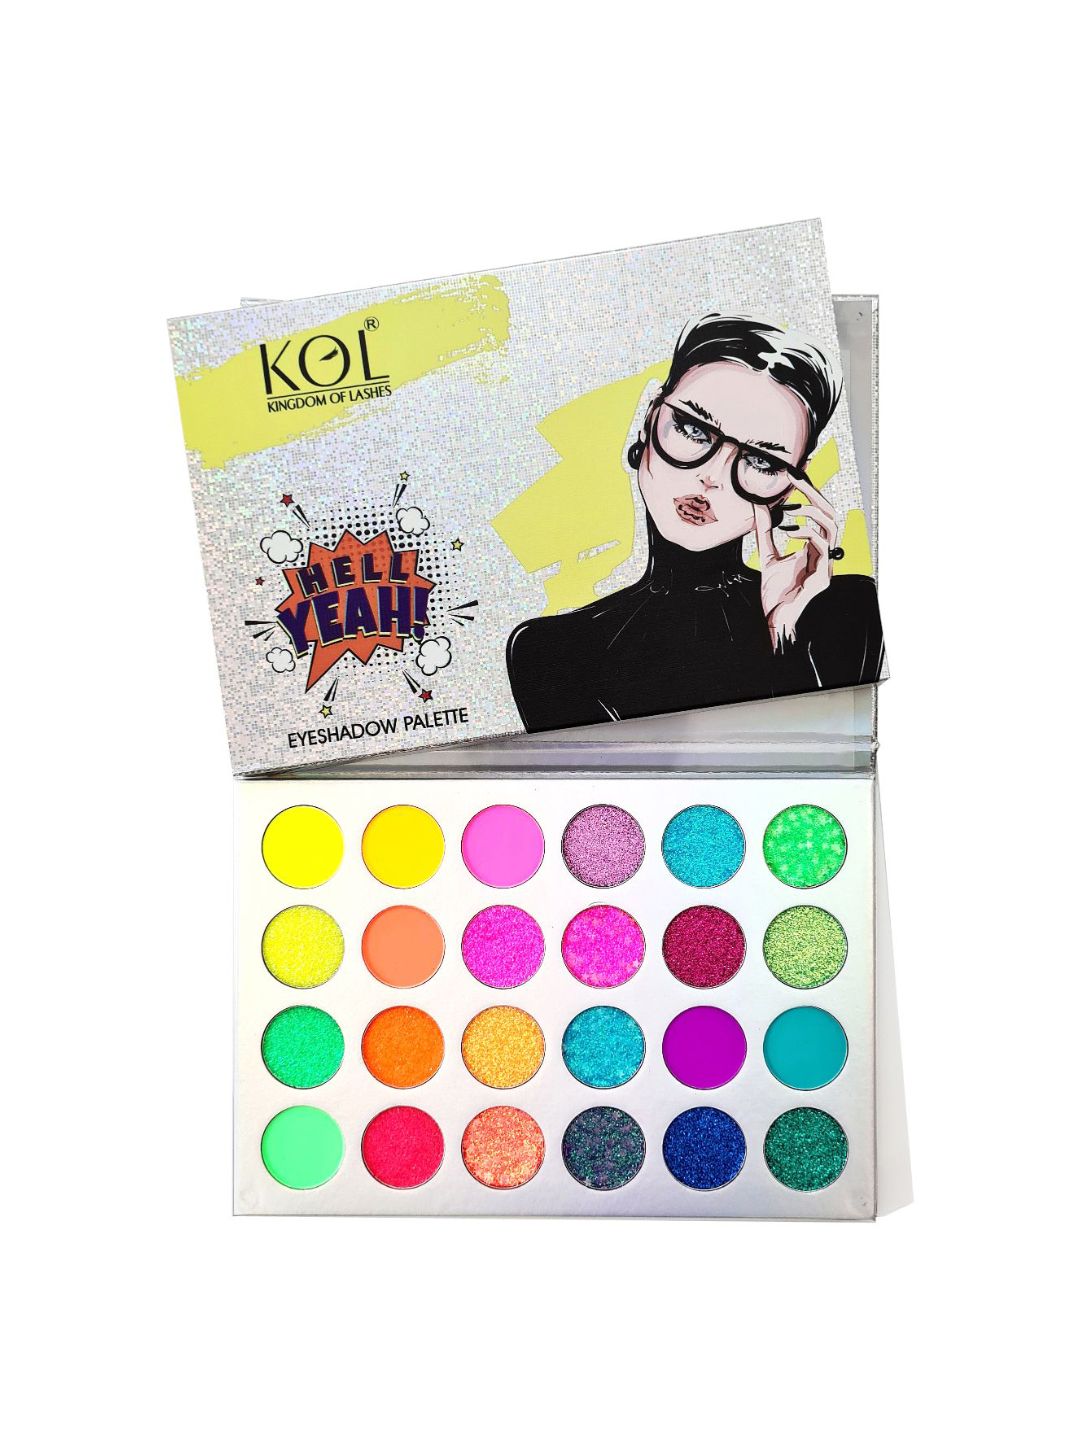 KINGDOM OF LASHES Hell Yeah 24 Shade Eyeshadow Palette - Neon Price in India